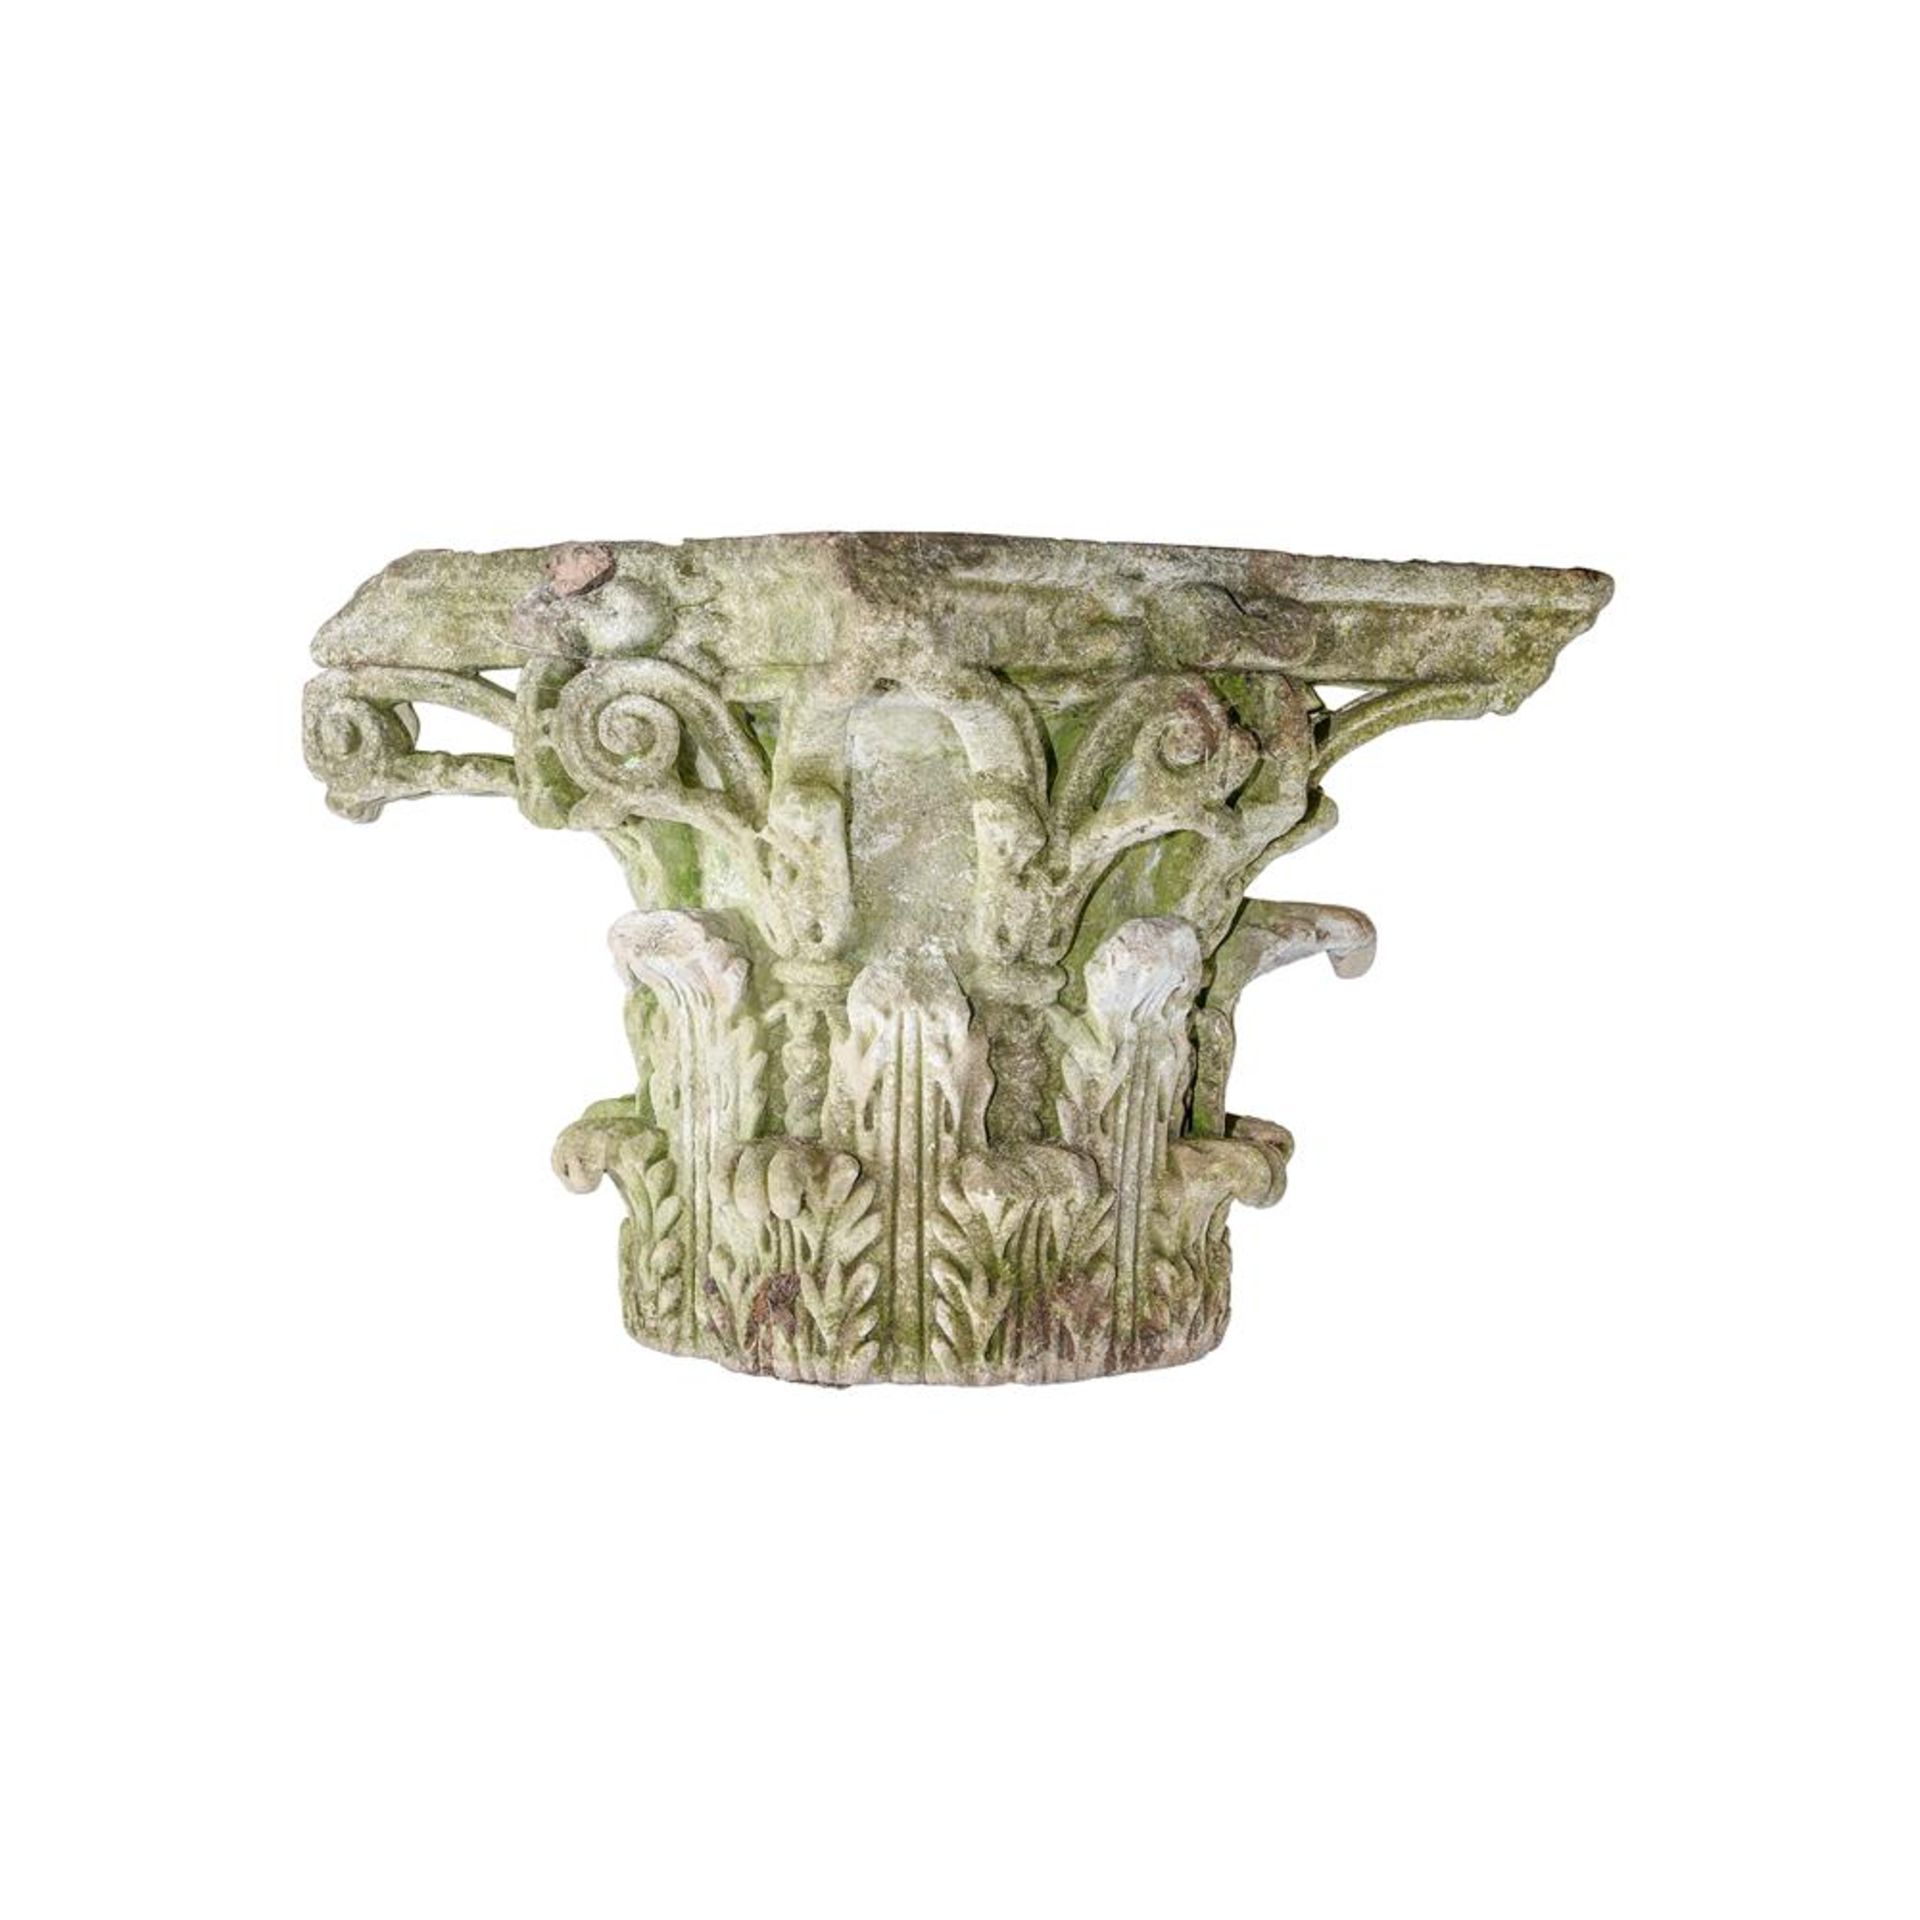 A CARVED LIMESTONE CAPITAL, 19TH CENTURY OR EARLIER - Image 2 of 2